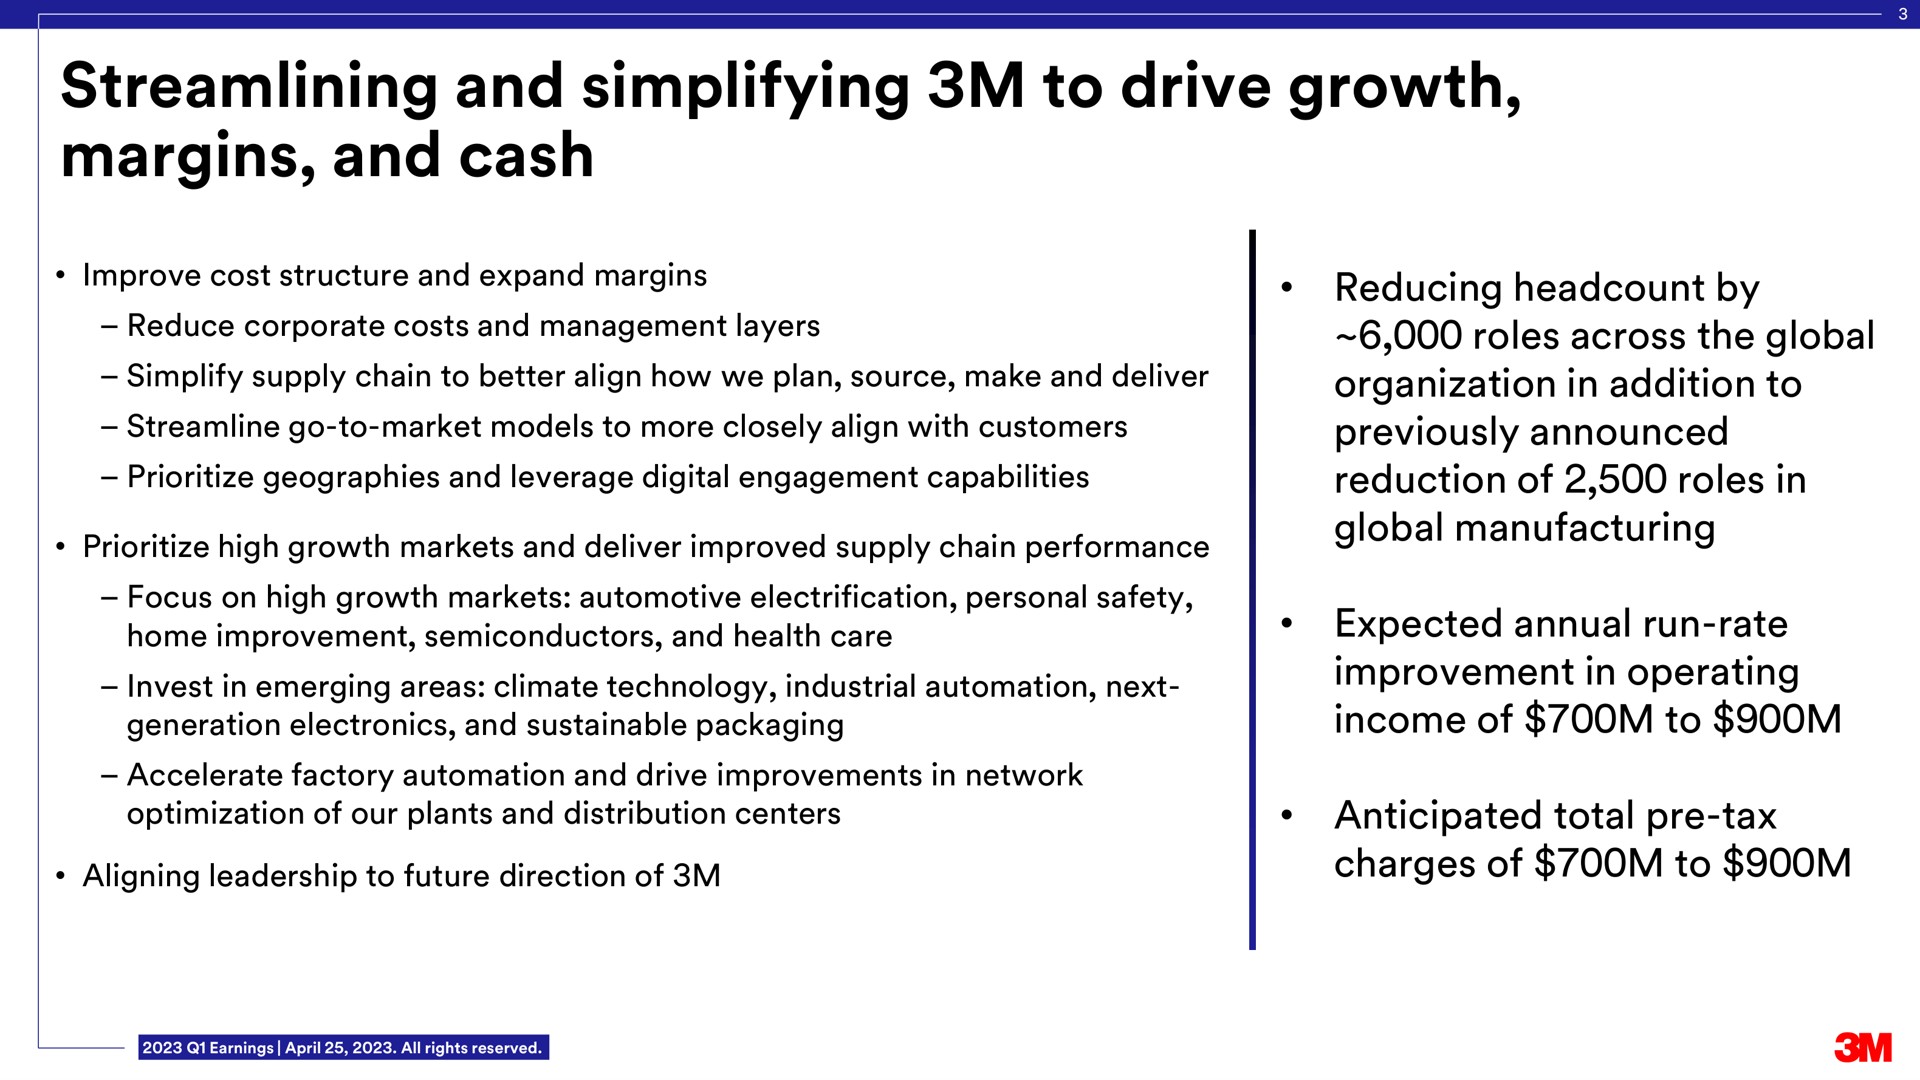 streamlining and simplifying to drive growth margins and cash | 3M